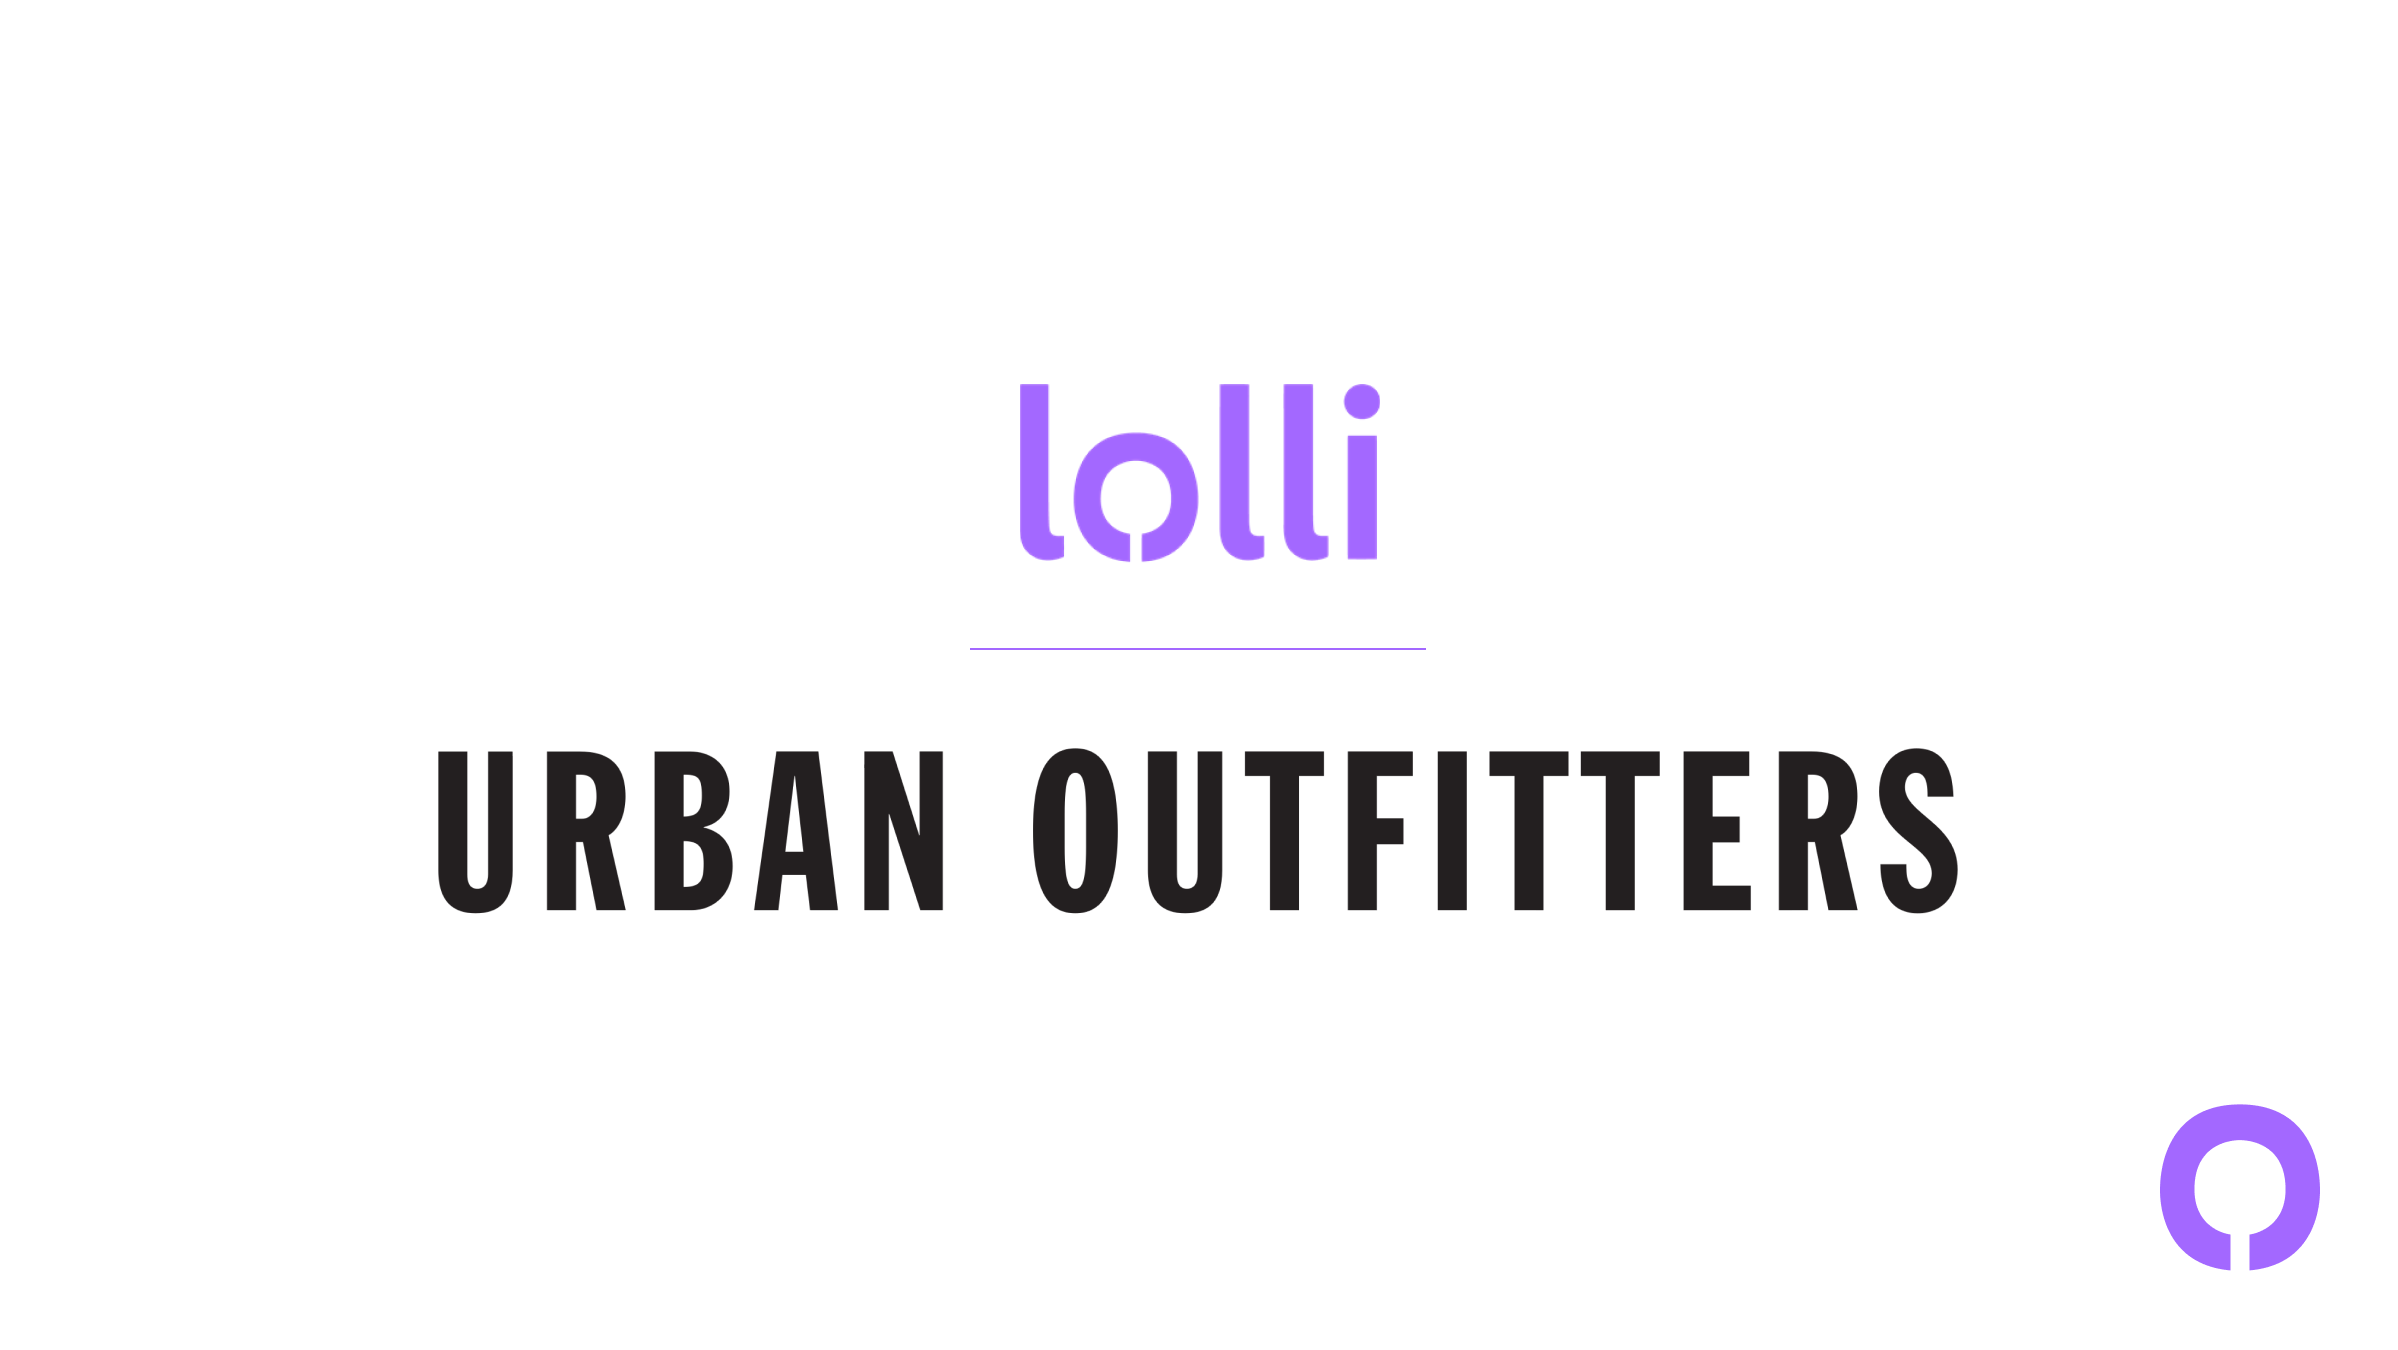 Urban Outfitters Is Now on Lolli!